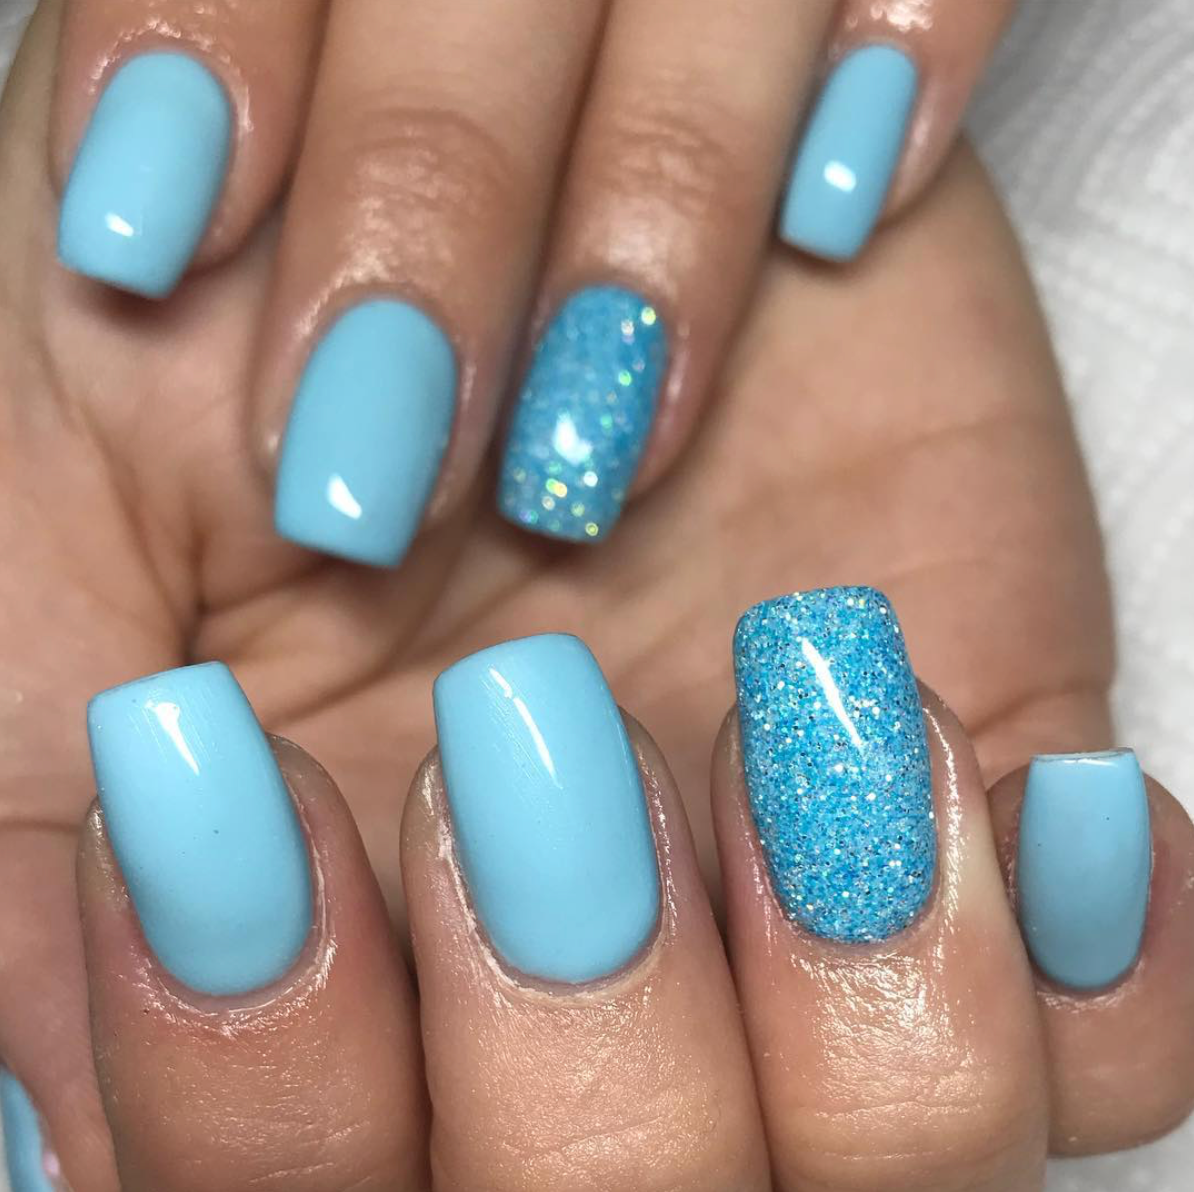 Doly Daydream Gel Color